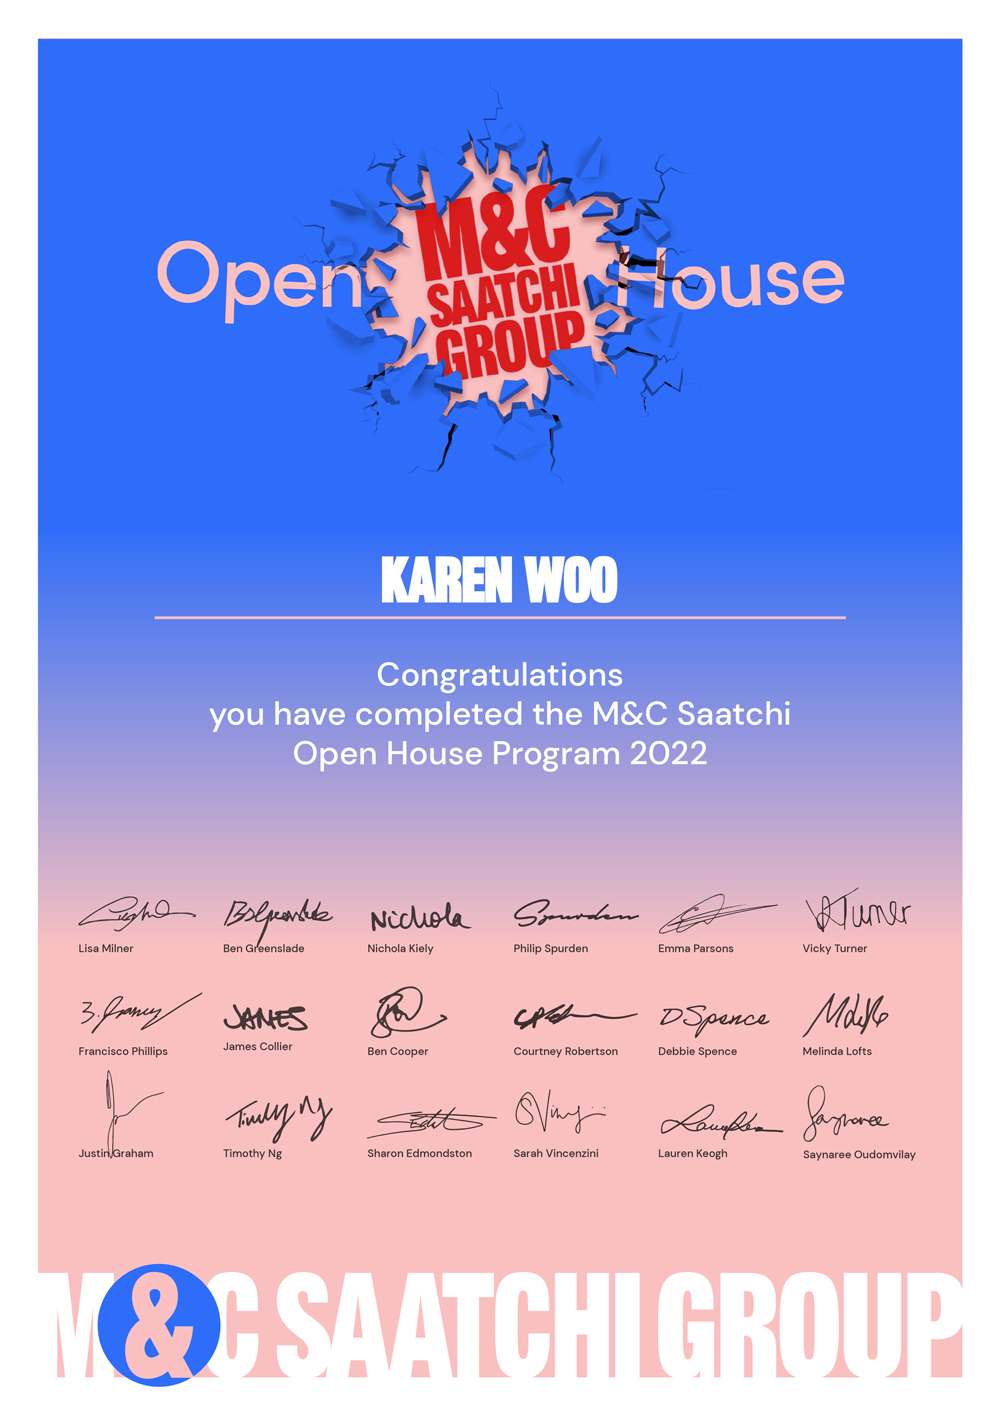 Pursue growth unapologetically: My Epic Journey at M&C Saatchi Group AUNZ Open House Program!